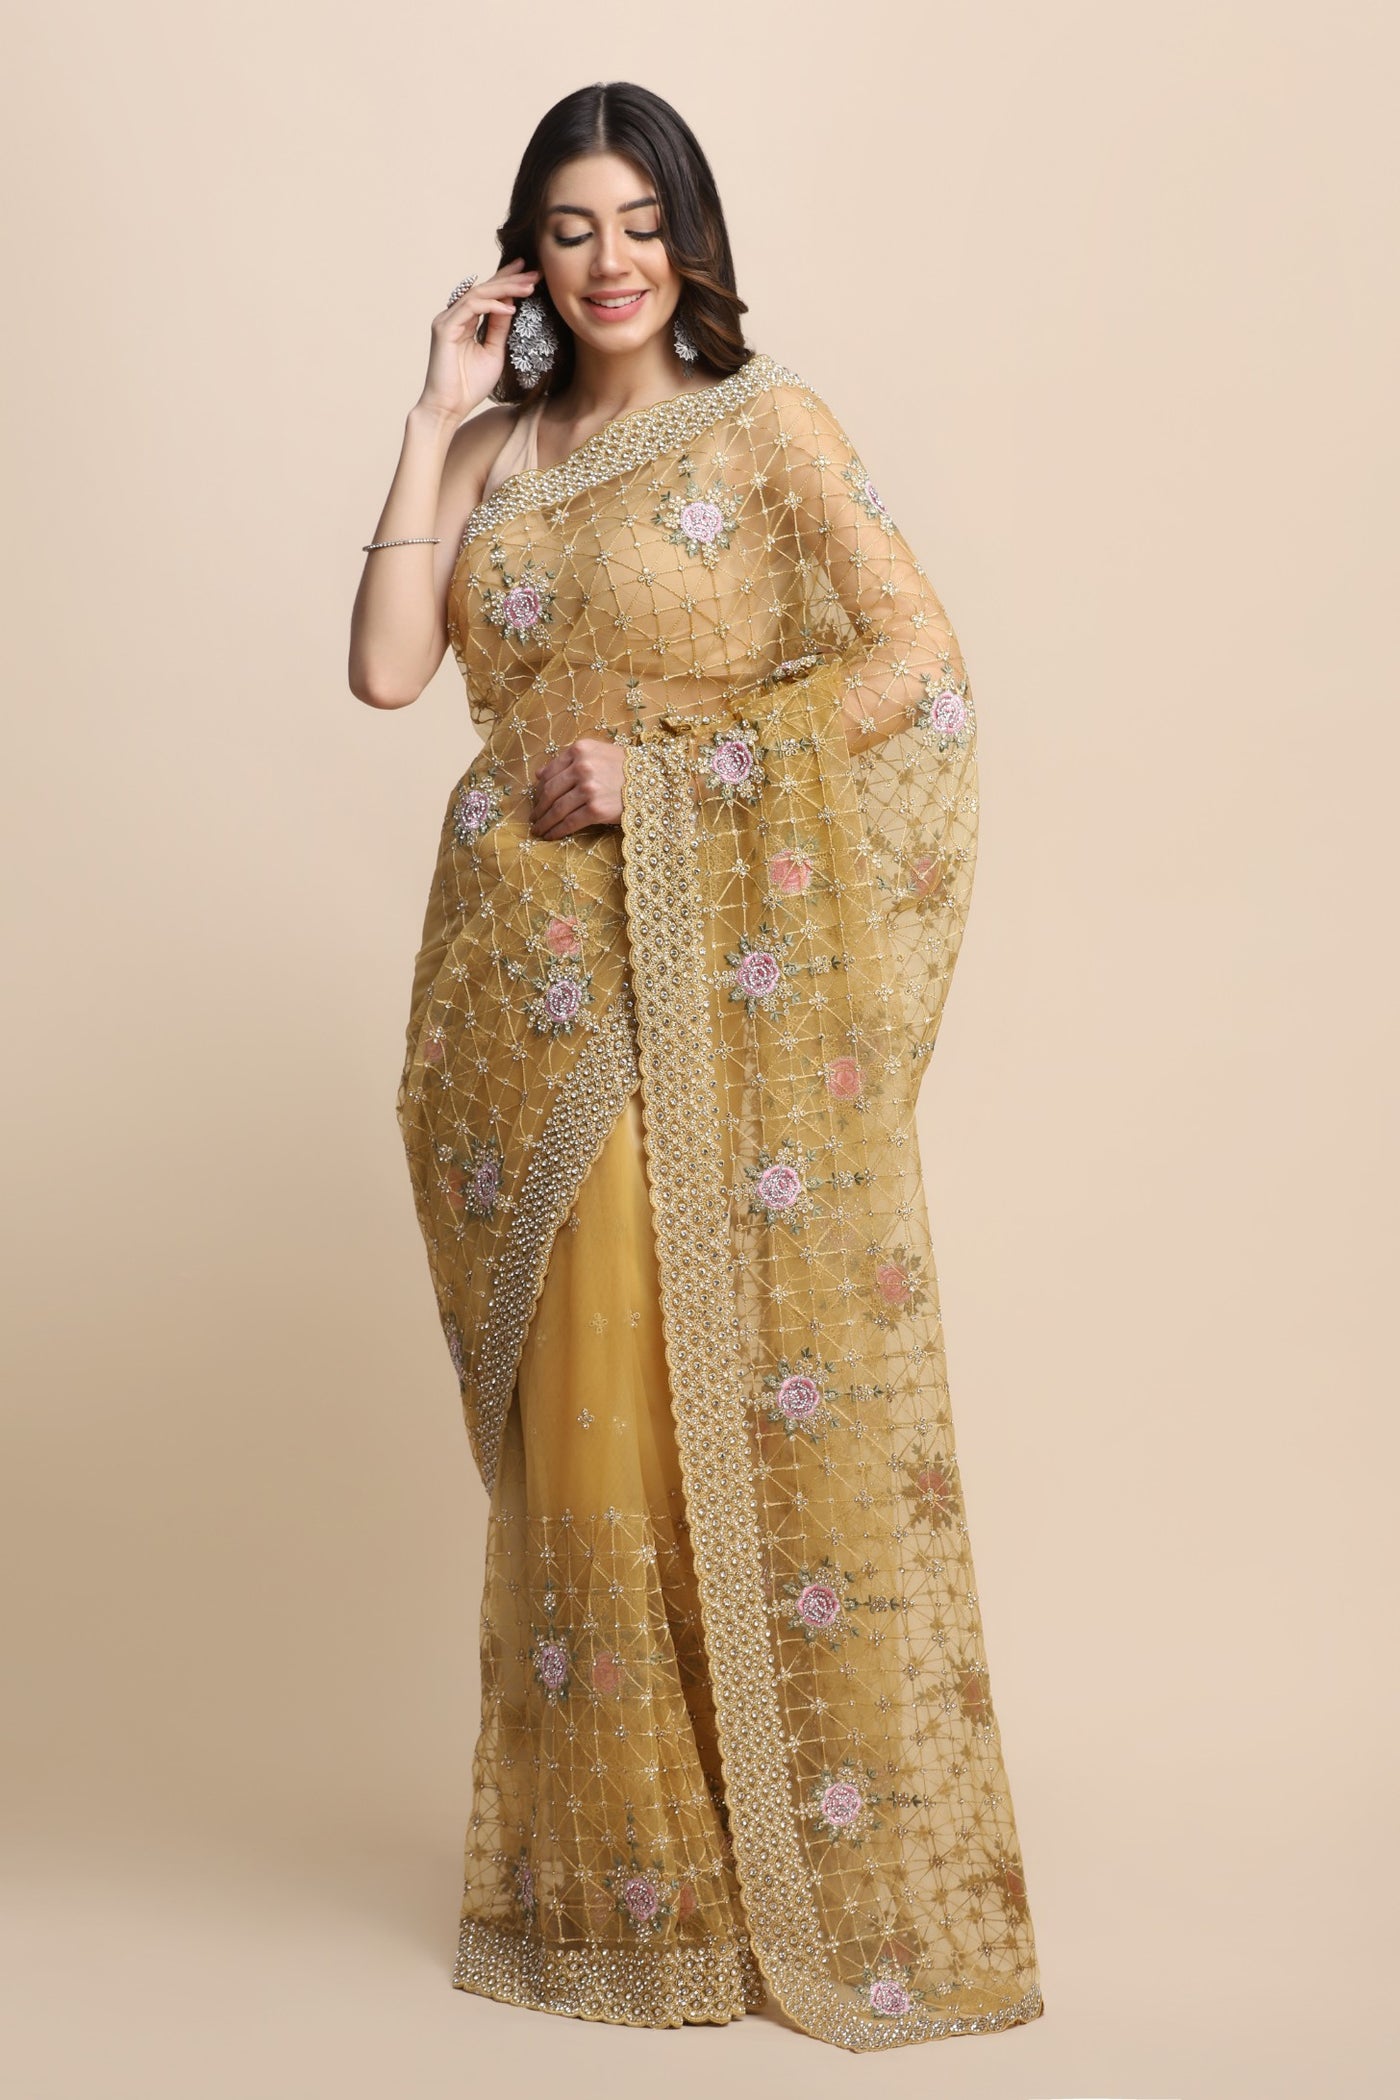 Gorgeous yellow color floral jaal embroidered saree